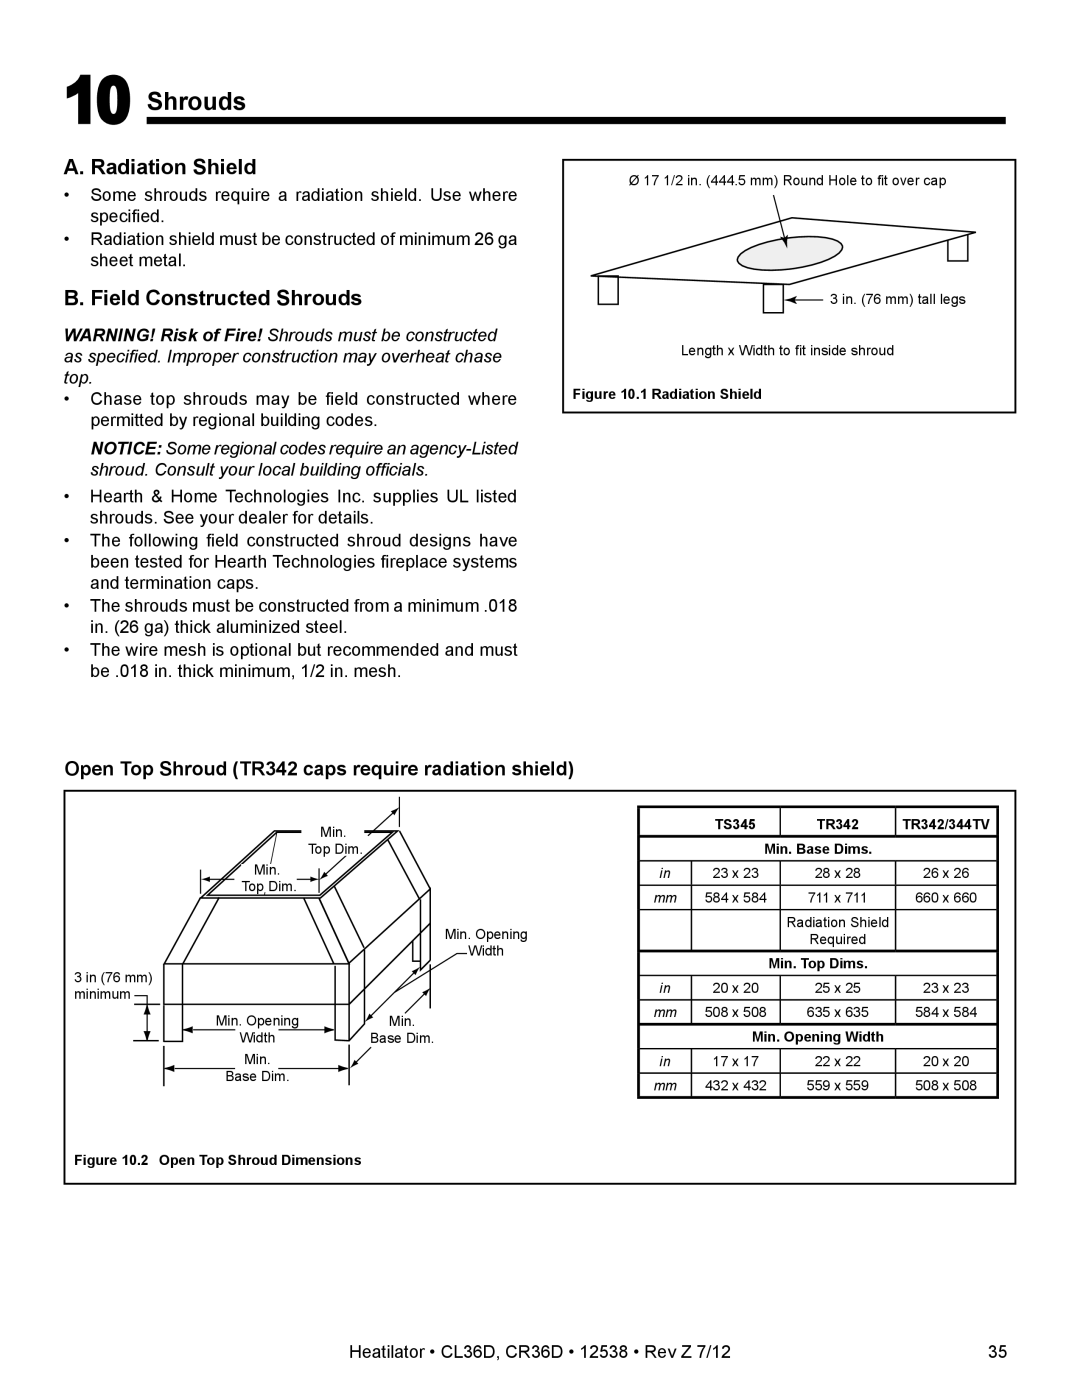 Heatiator CL36D owner manual A. Radiation Shield, B. Field Constructed Shrouds 